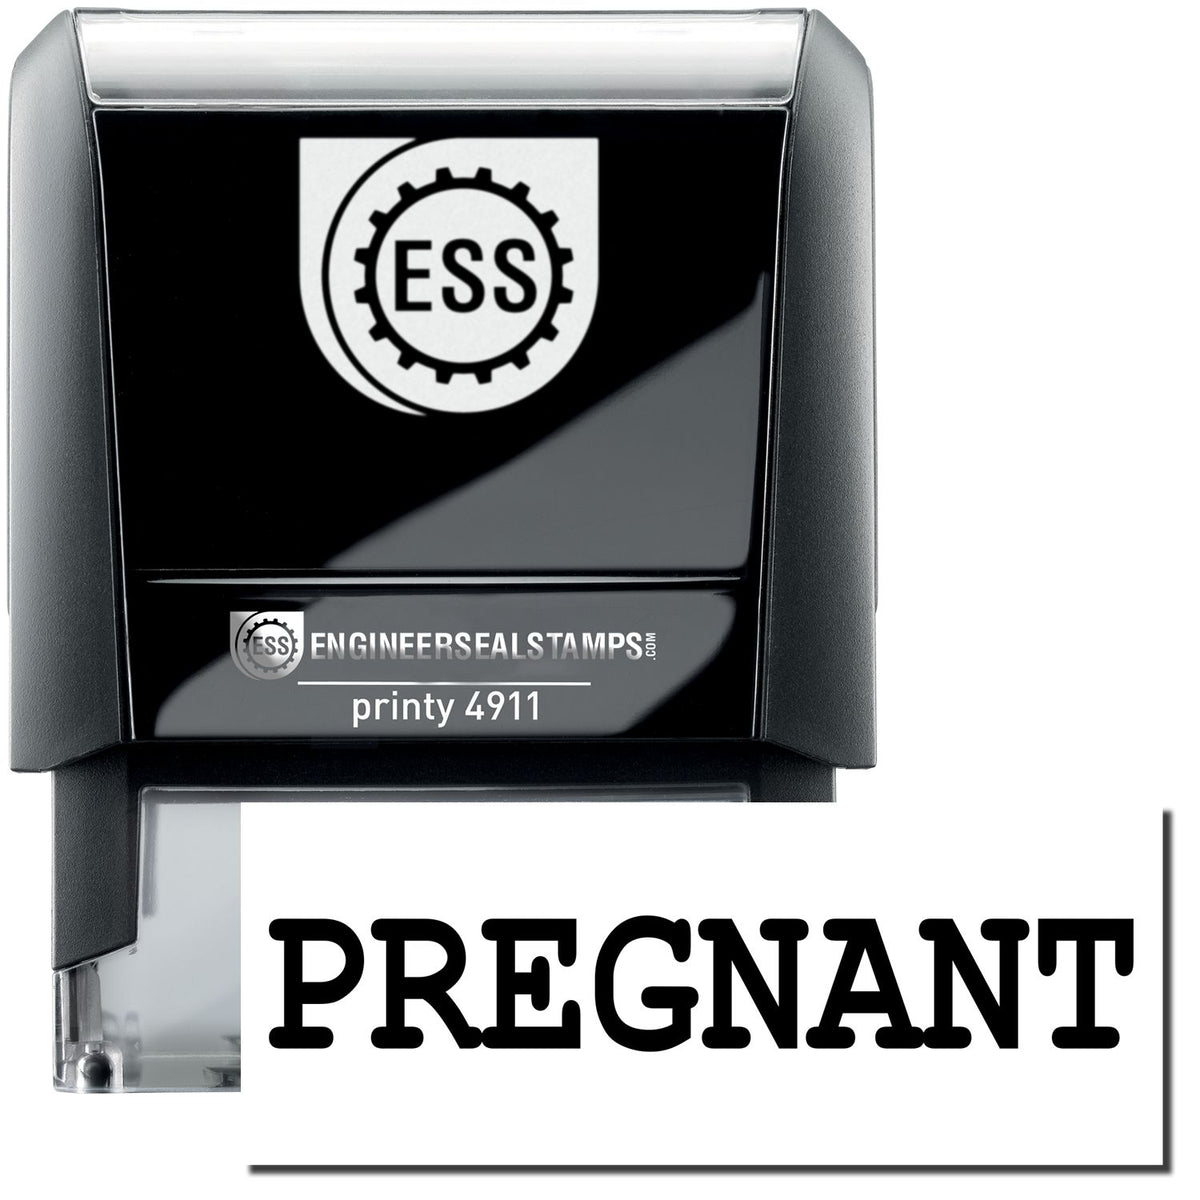 A self-inking stamp with a stamped image showing how the text &quot;PREGNANT&quot; is displayed after stamping.